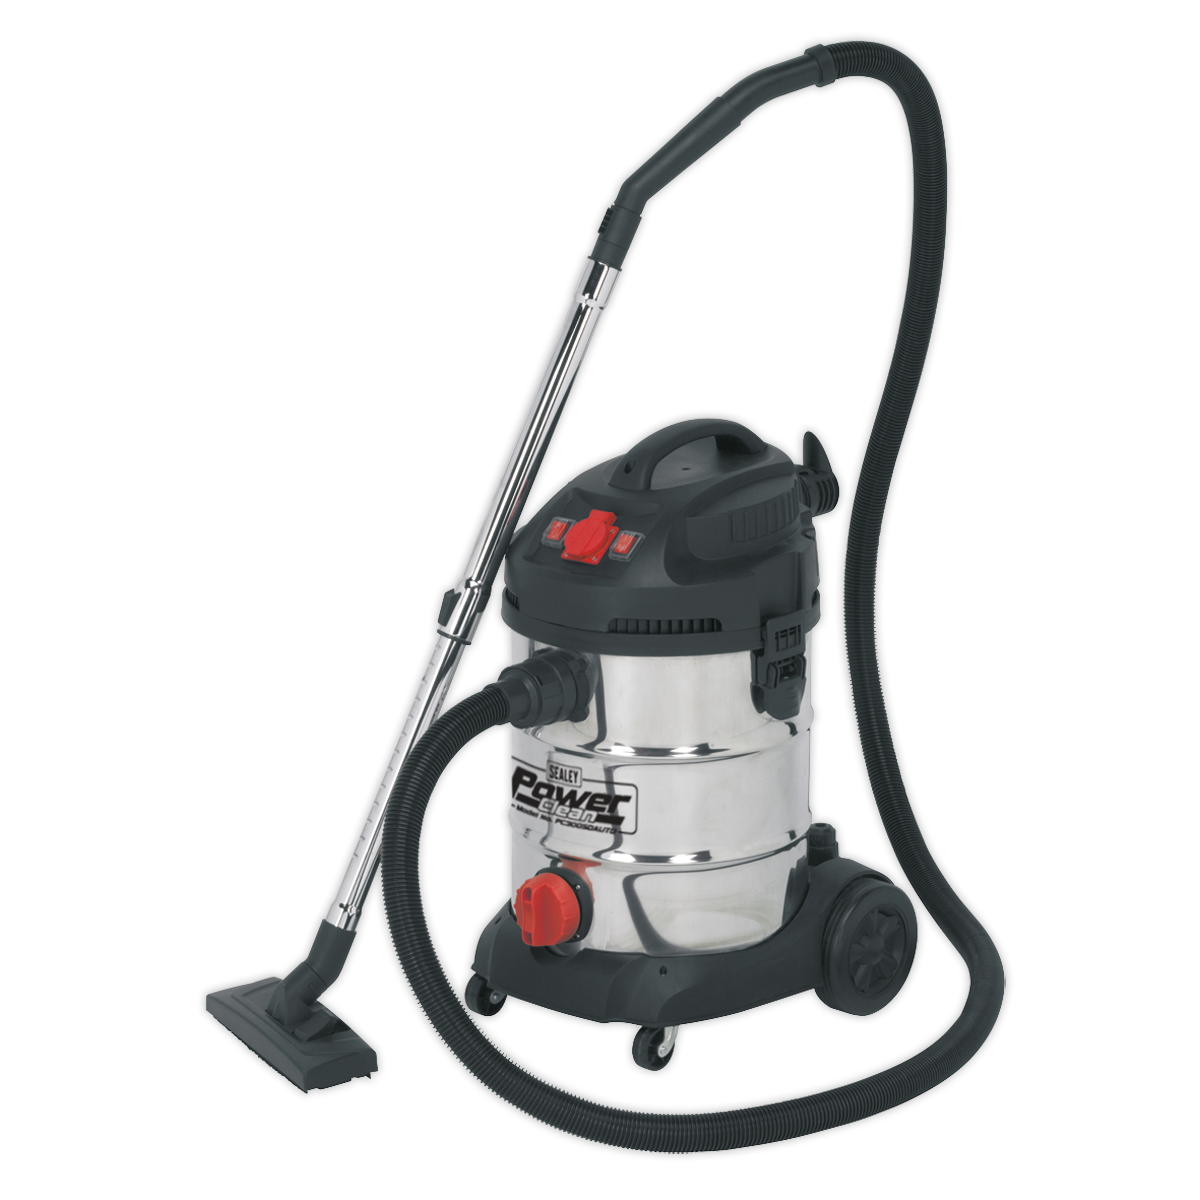 Vacuum Cleaner Industrial 30L 1400W/230V Stainless Drum Auto Start - PC300SDAUTO - Farming Parts